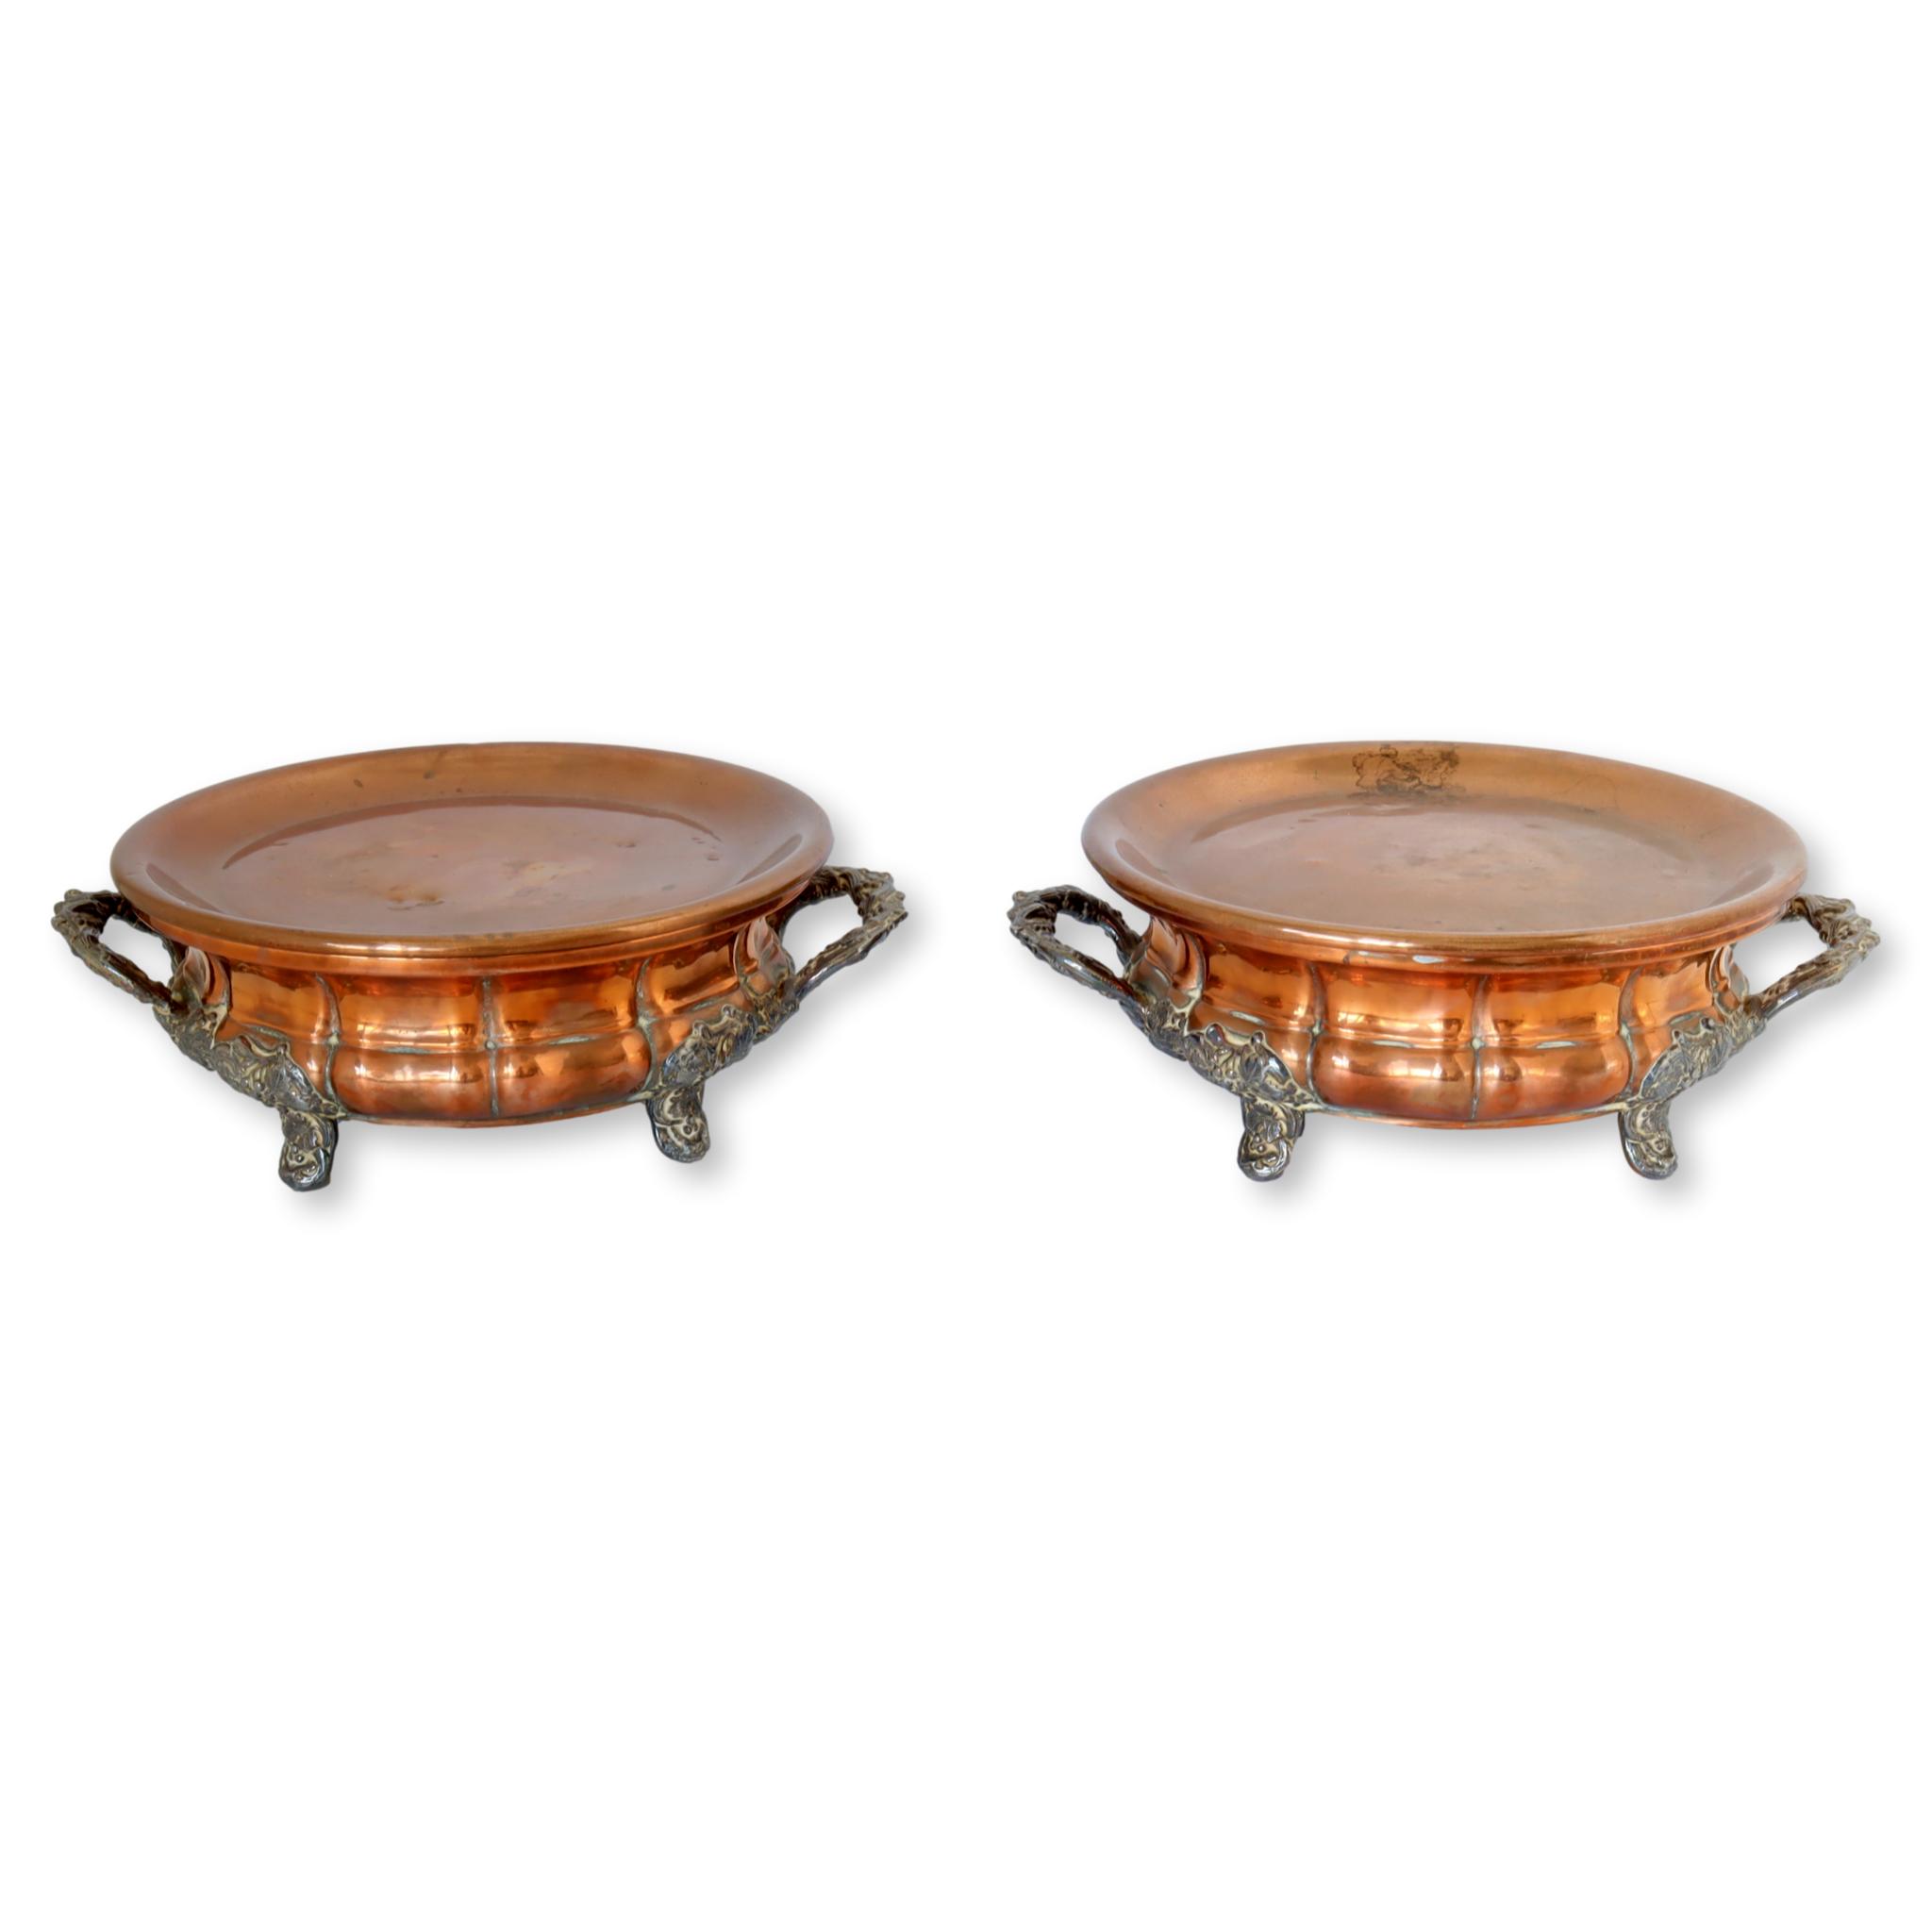 Antique French Copper Stands, Pair~P77665060